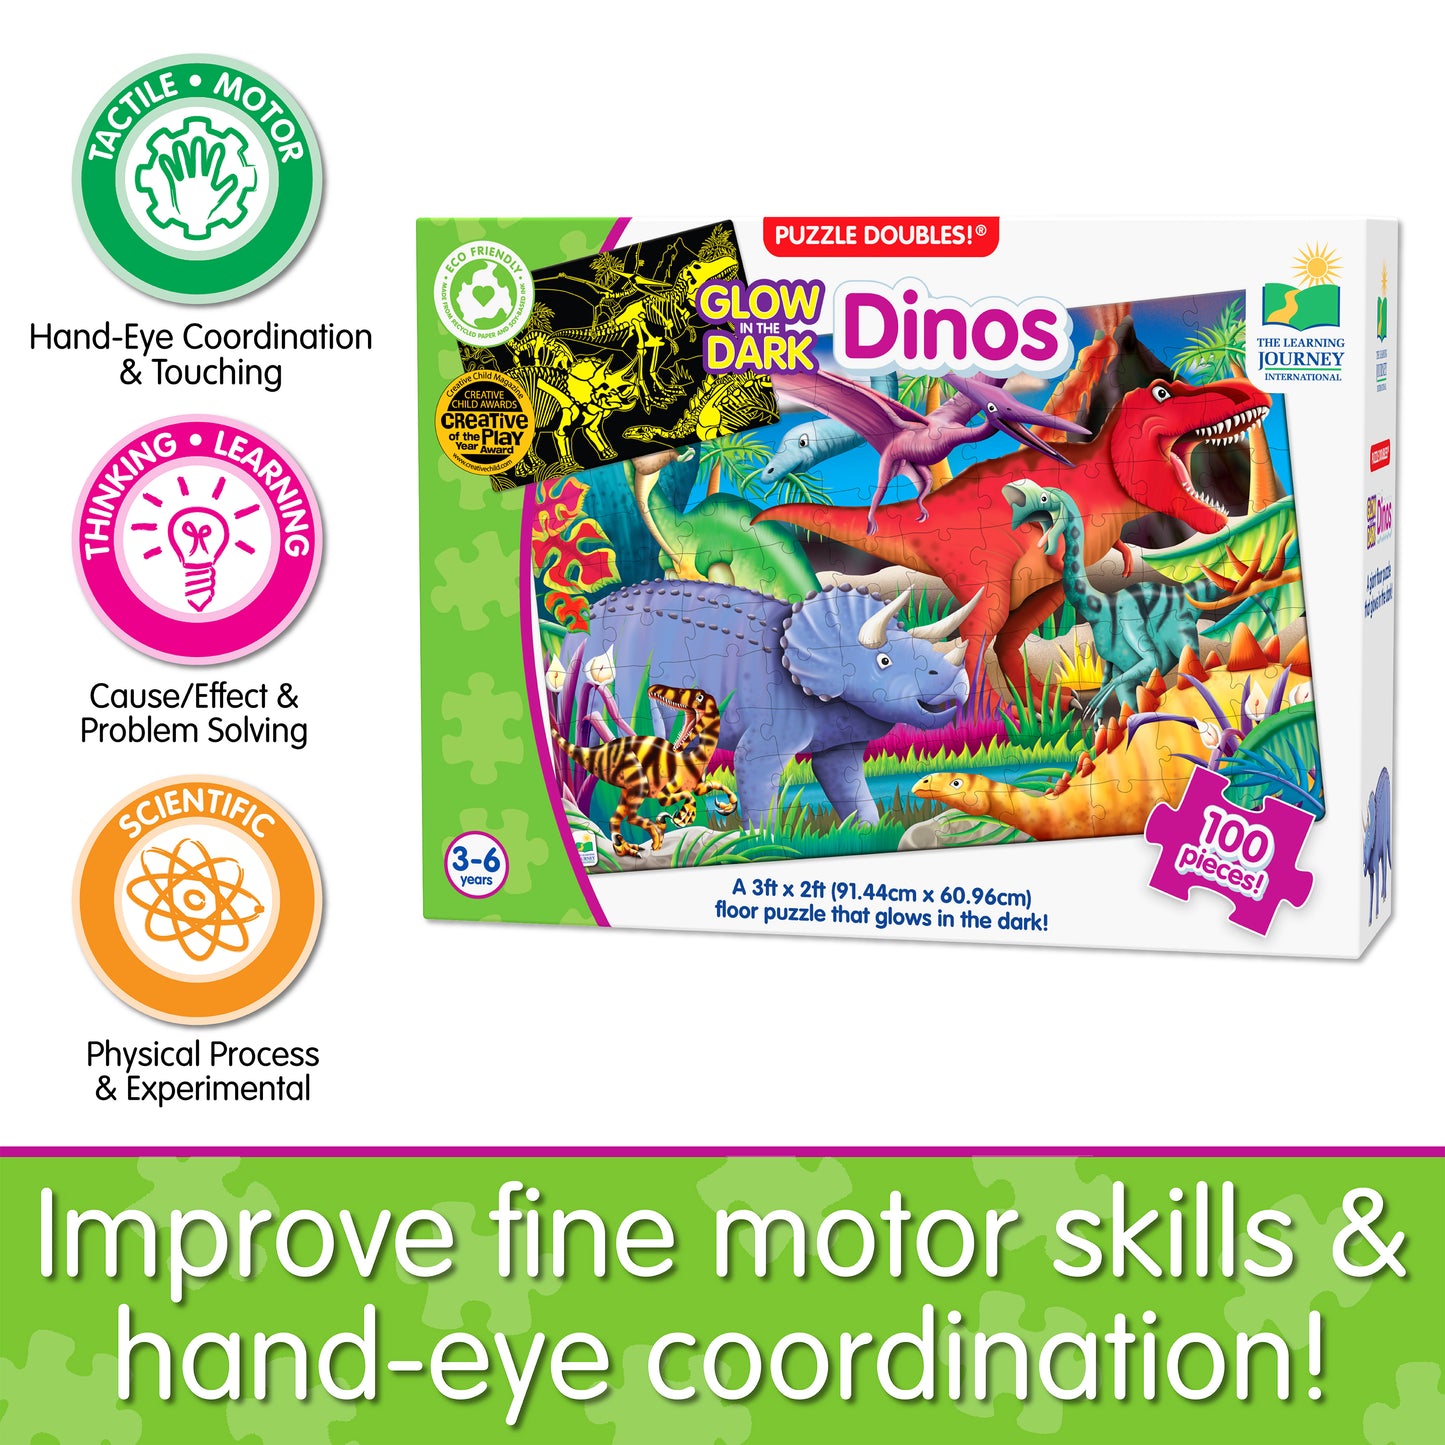 Infographic about Glow in the Dark - Dinos' educational benefits that says, "Improve fine motor skills and hand-eye coordination!"